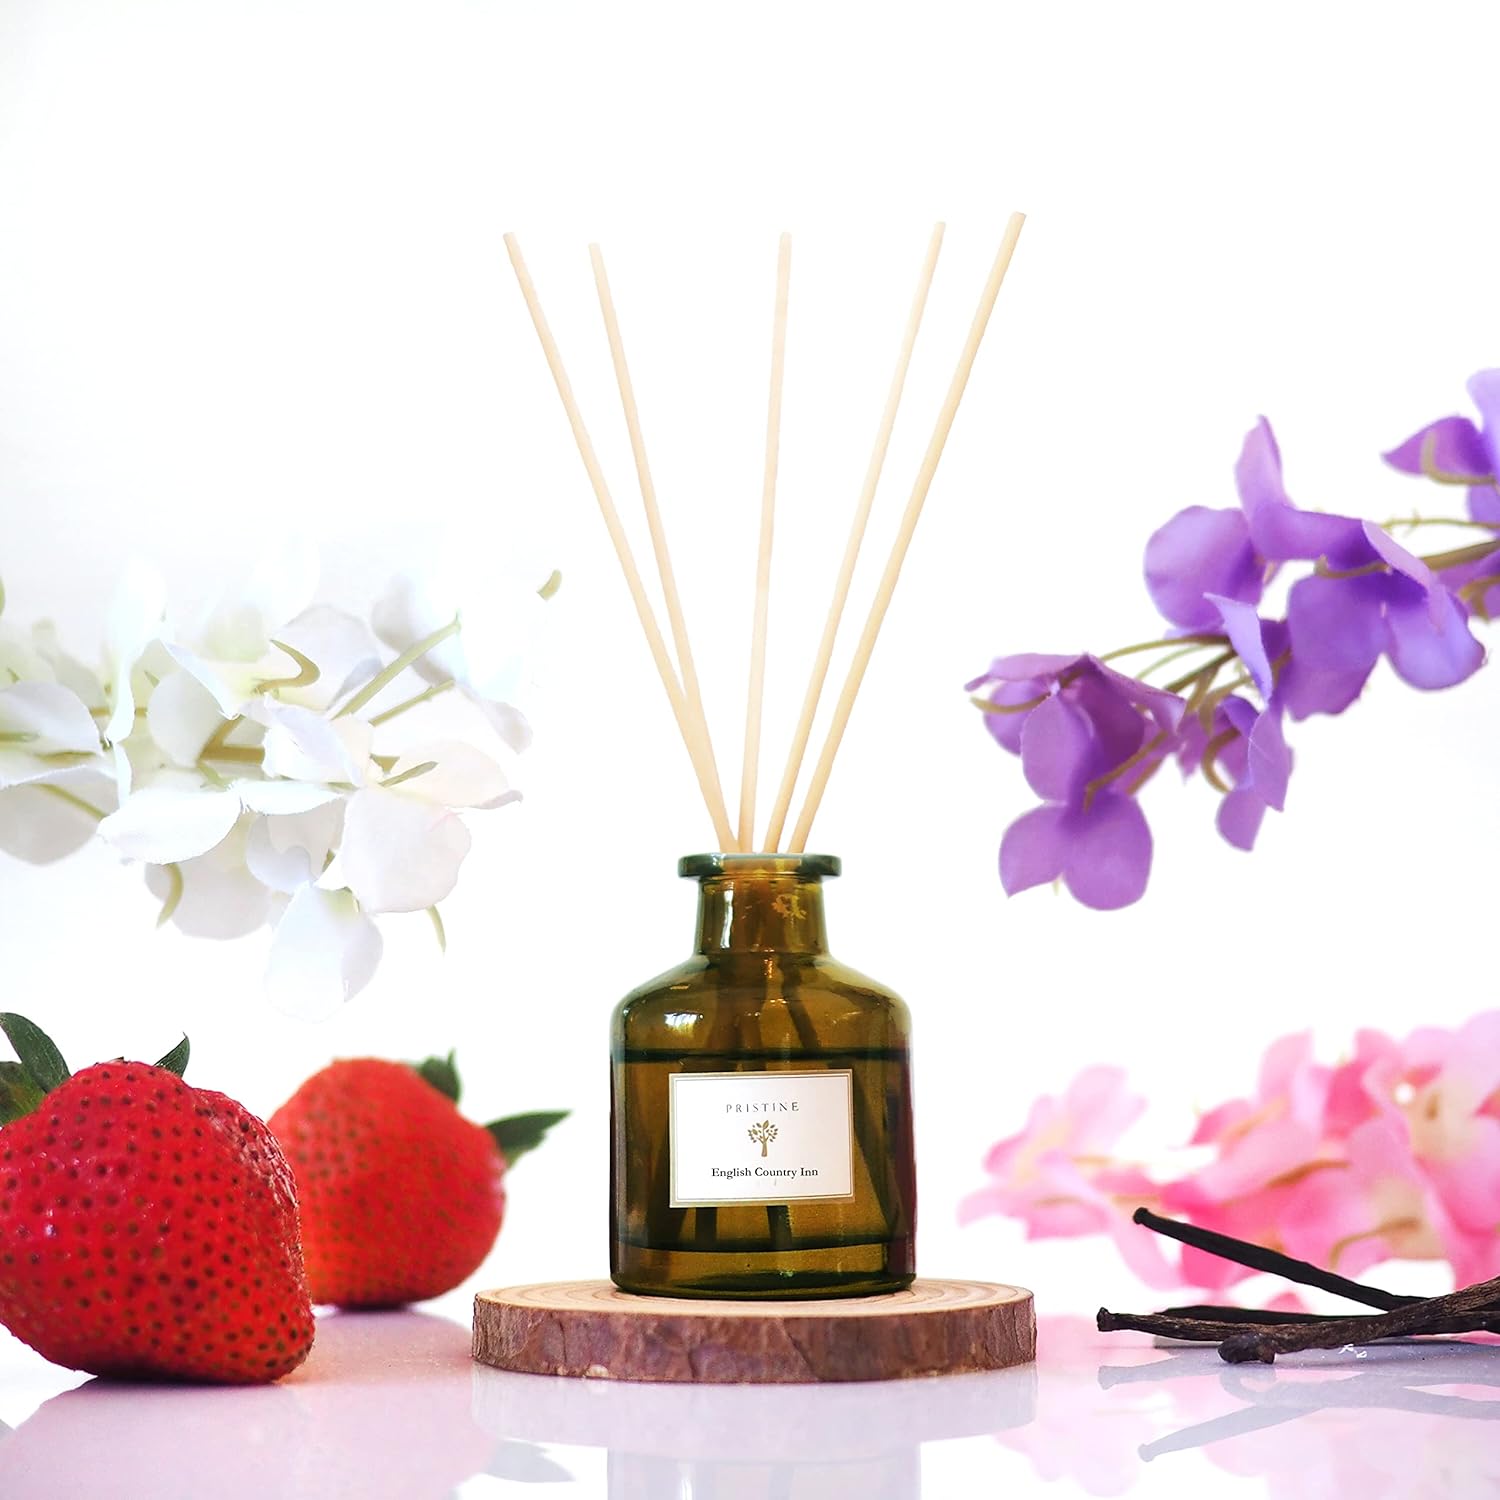 PRISTINE English Country Inn/Inspired by Ritz Carlton Reed Diffuser for Home | Fresh Blend of Strawberry, Vanilla, Musk Reed Diffuser Set, Oil & Reed Diffuser Sticks-Home & Office Decor-Fragrance Gift